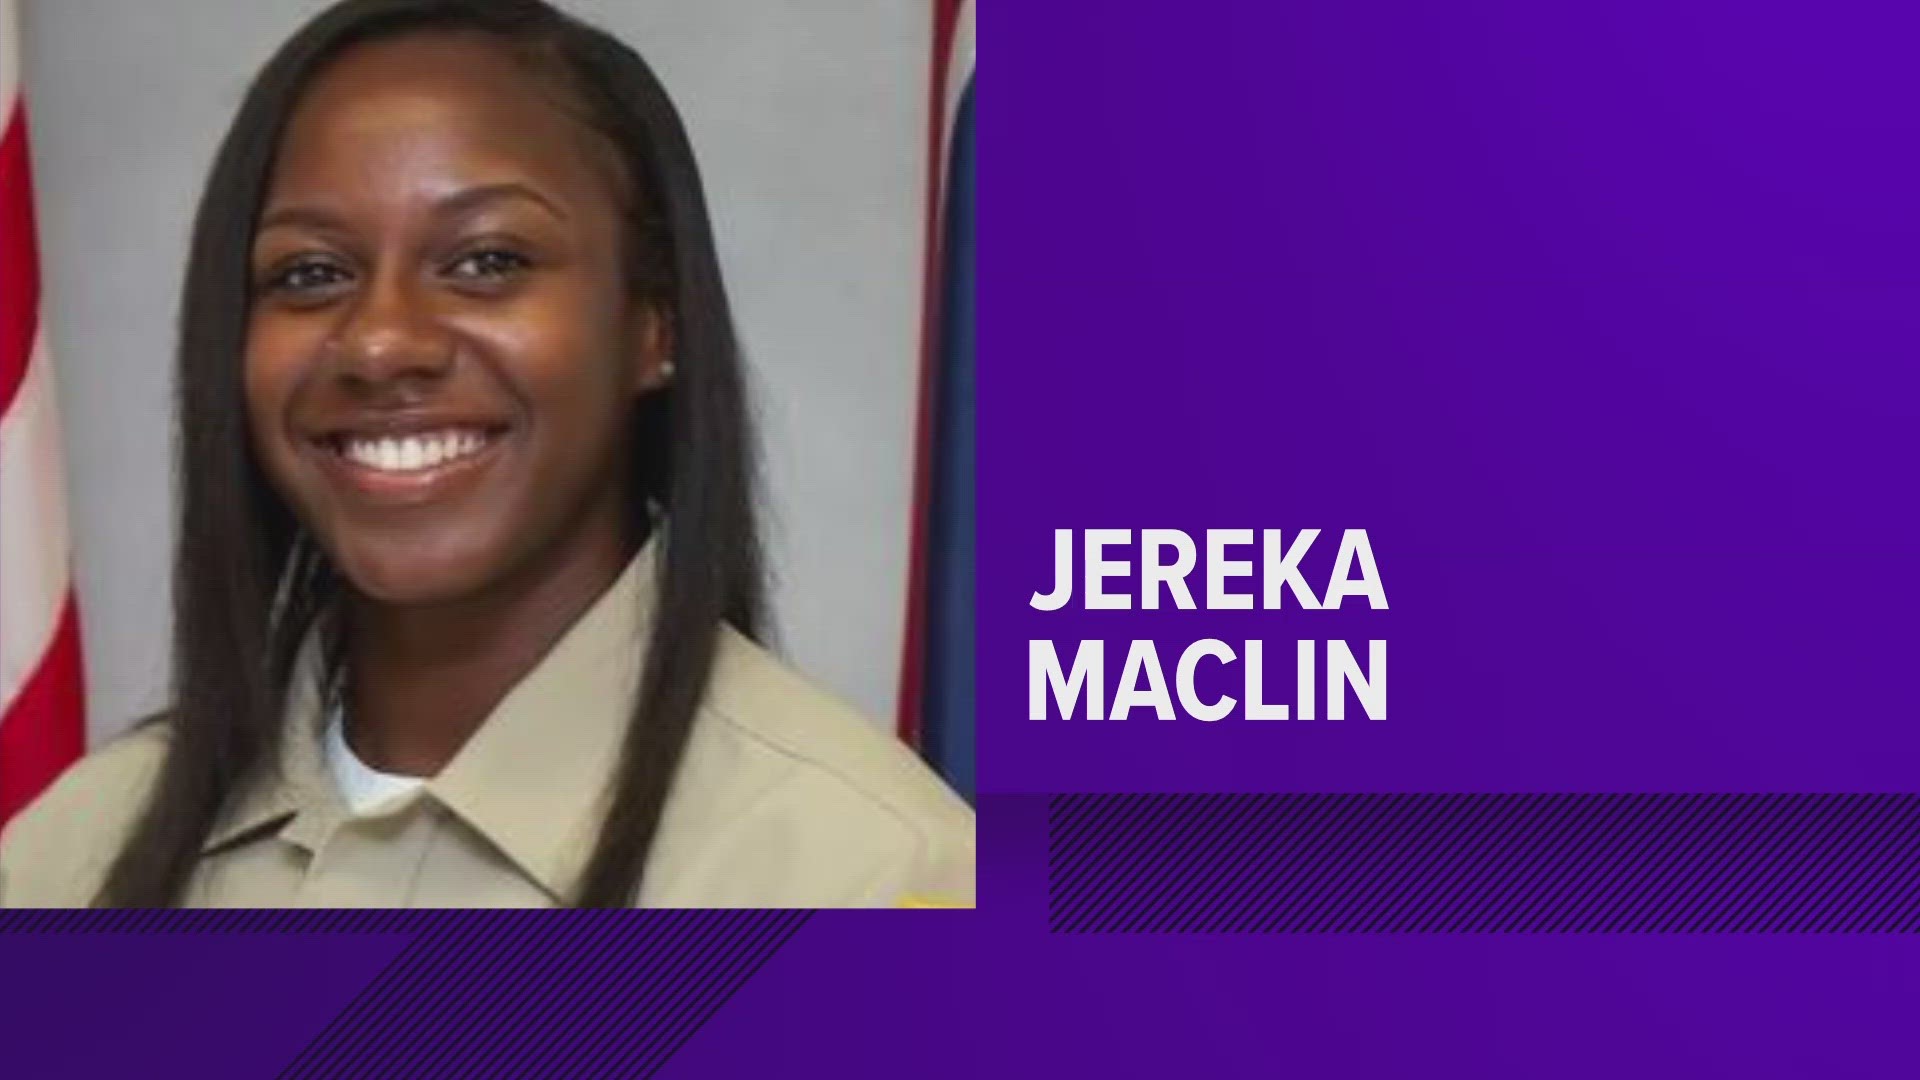 The sheriff's office said although her injuries are severe, Deputy Jereka Maclin is expected to fully recover.